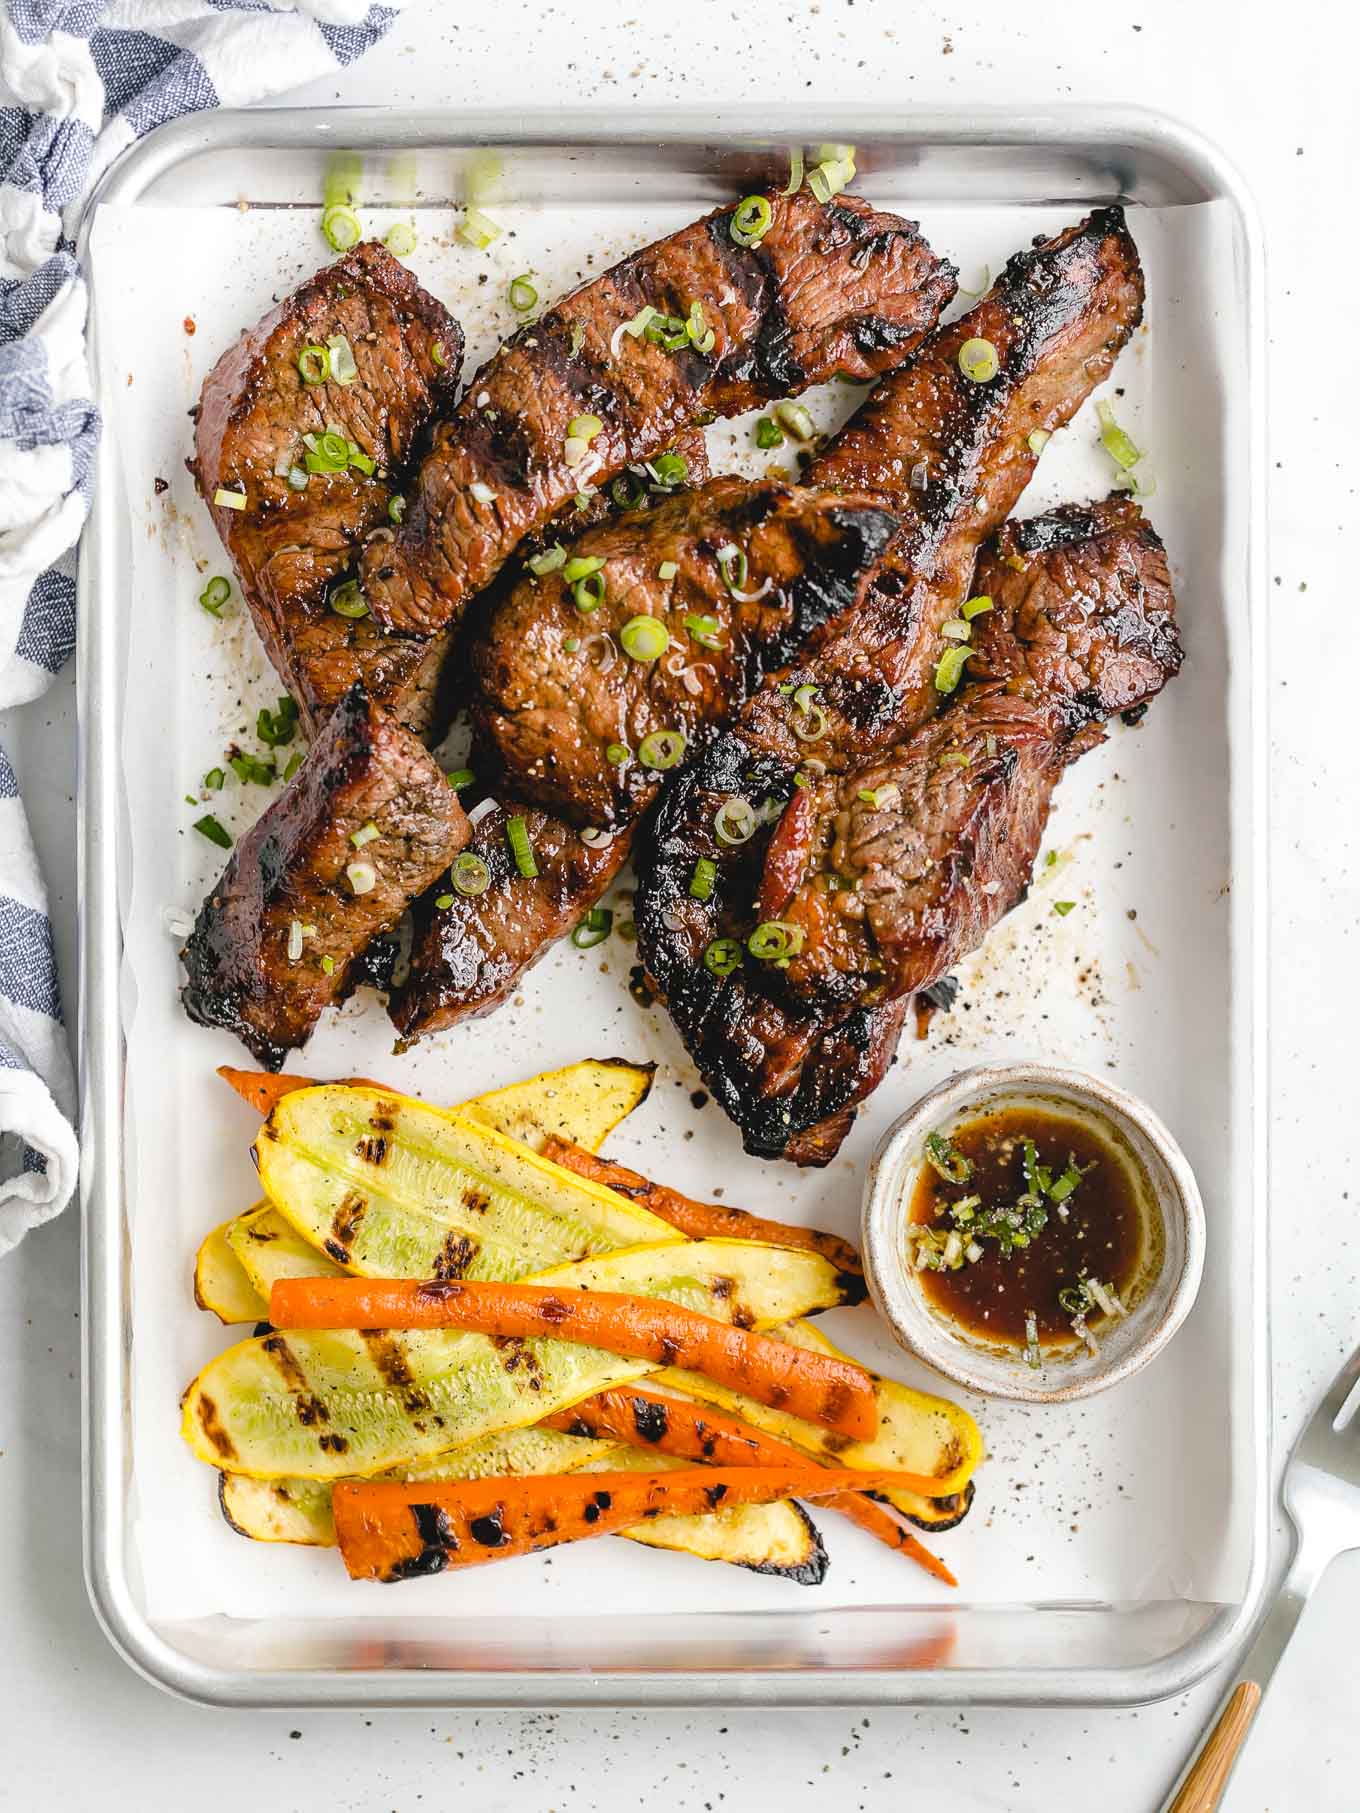 marinated and grilled steak tips